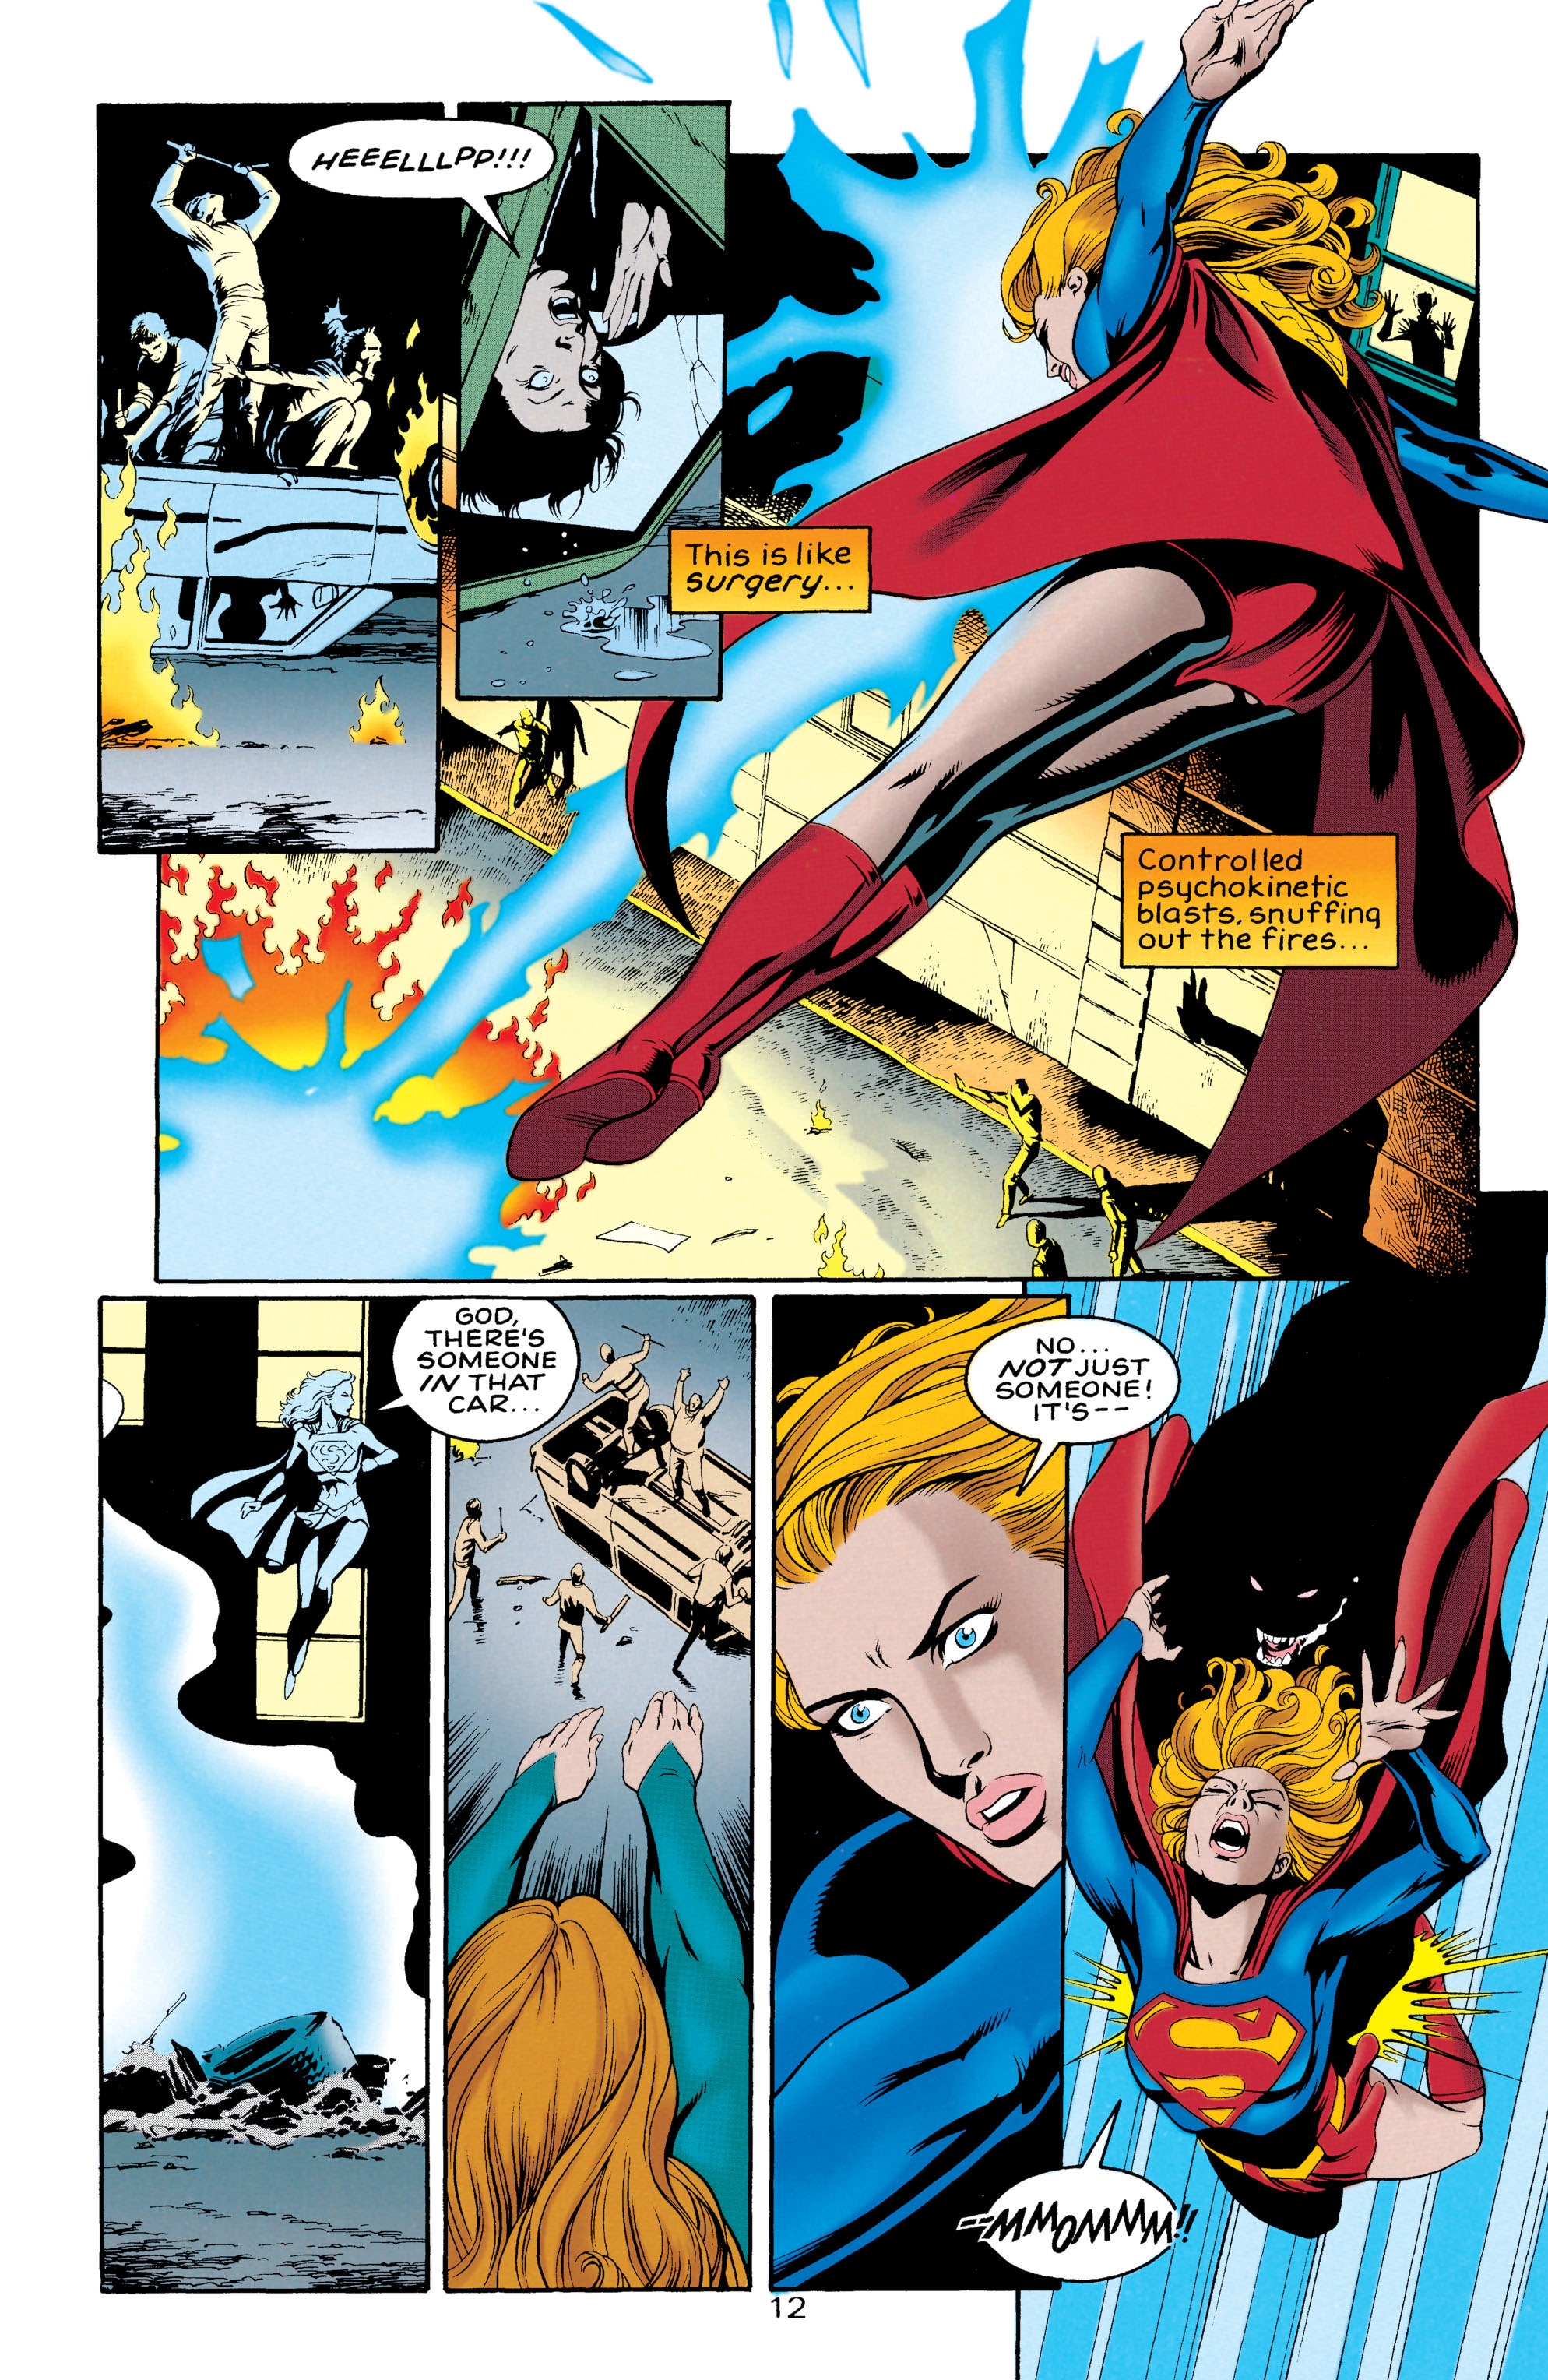 Supergirl (1996) 3 Page 12